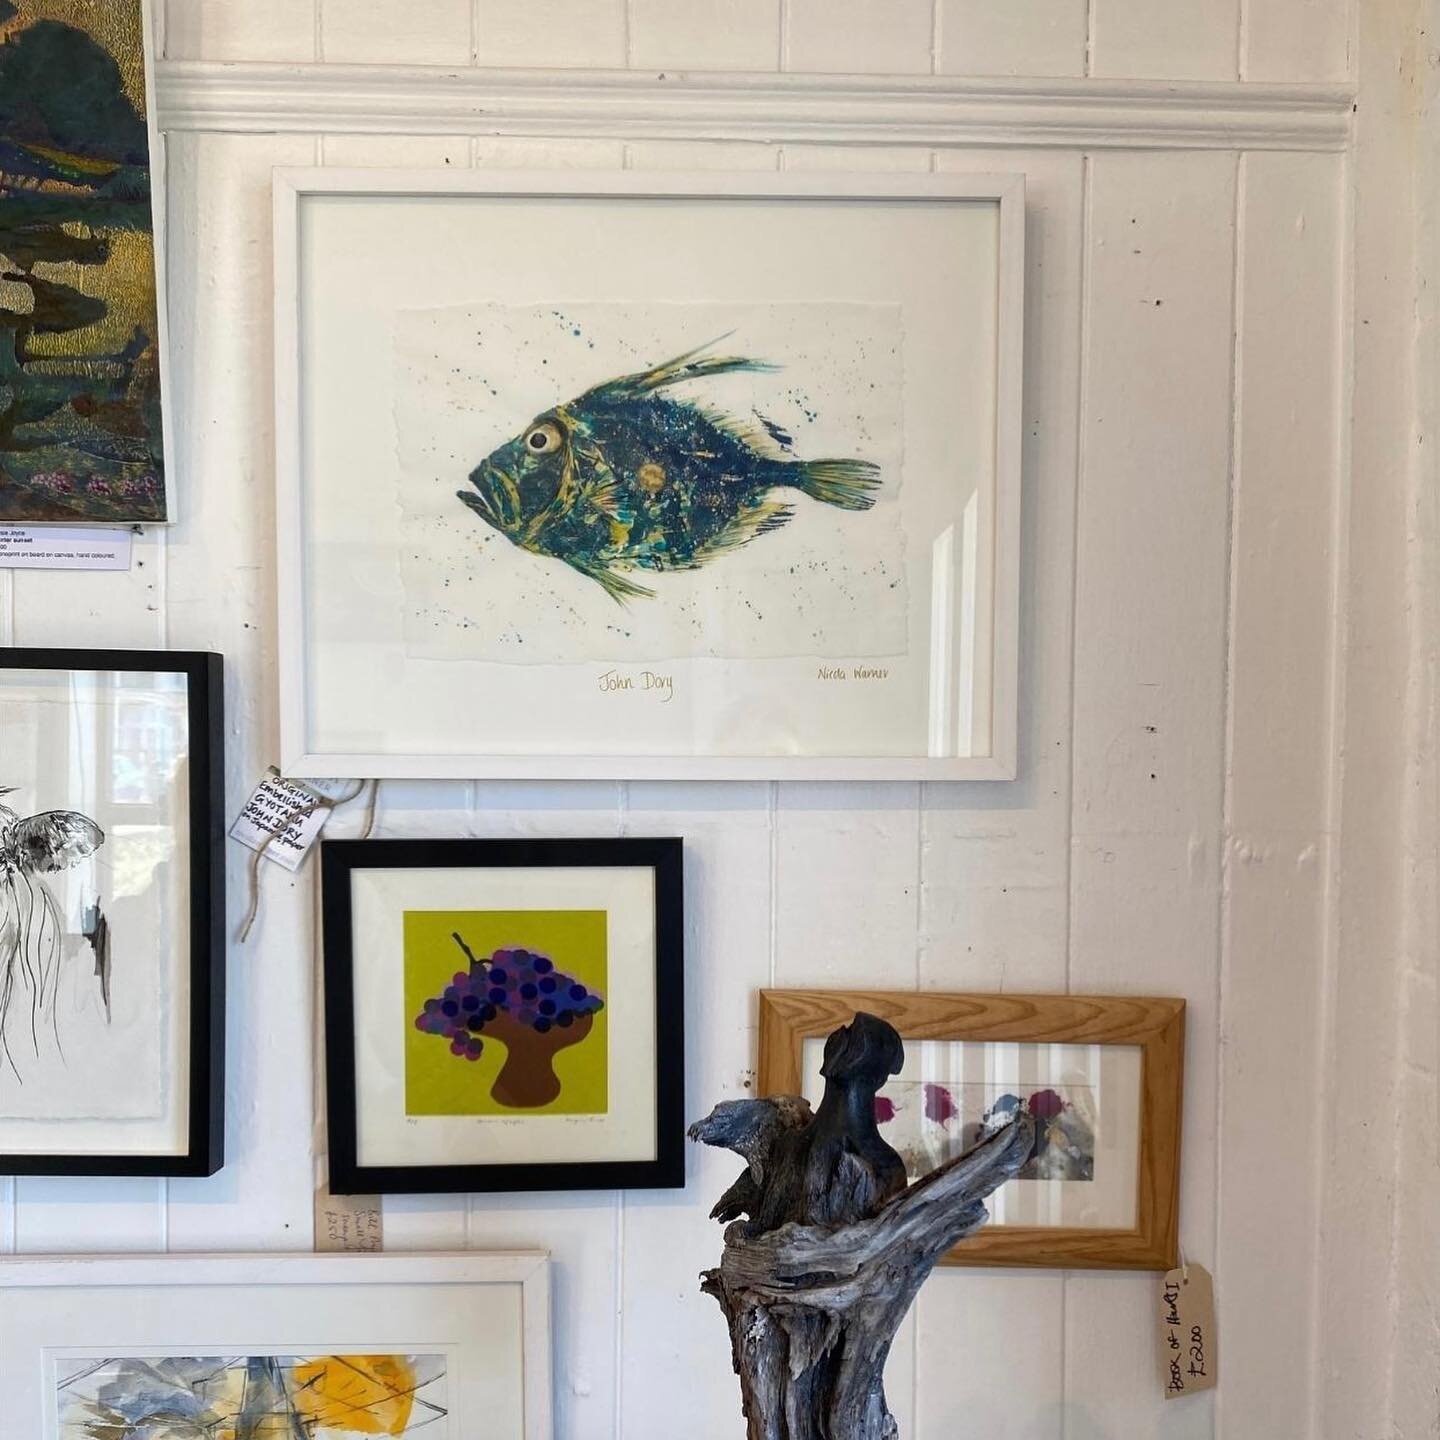 John Dory Gyotaku &bull; an original hand embellished Gyotaku on display at Aldeburgh Beach Lookout amongst art from 50 other artists, celebrating the 10th anniversary of The Arts Club Aldeburgh Beach 🏅

#aldeburgh #carnival #aldeburghcarnival #gyot